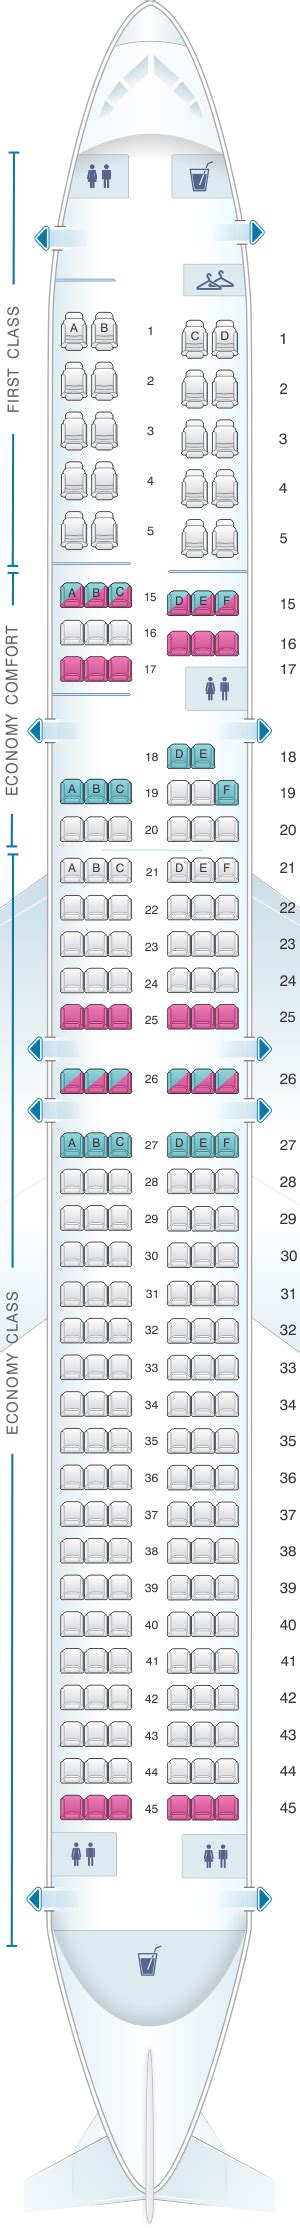 Delta Airlines Seating Chart 757 Cabinets Matttroy